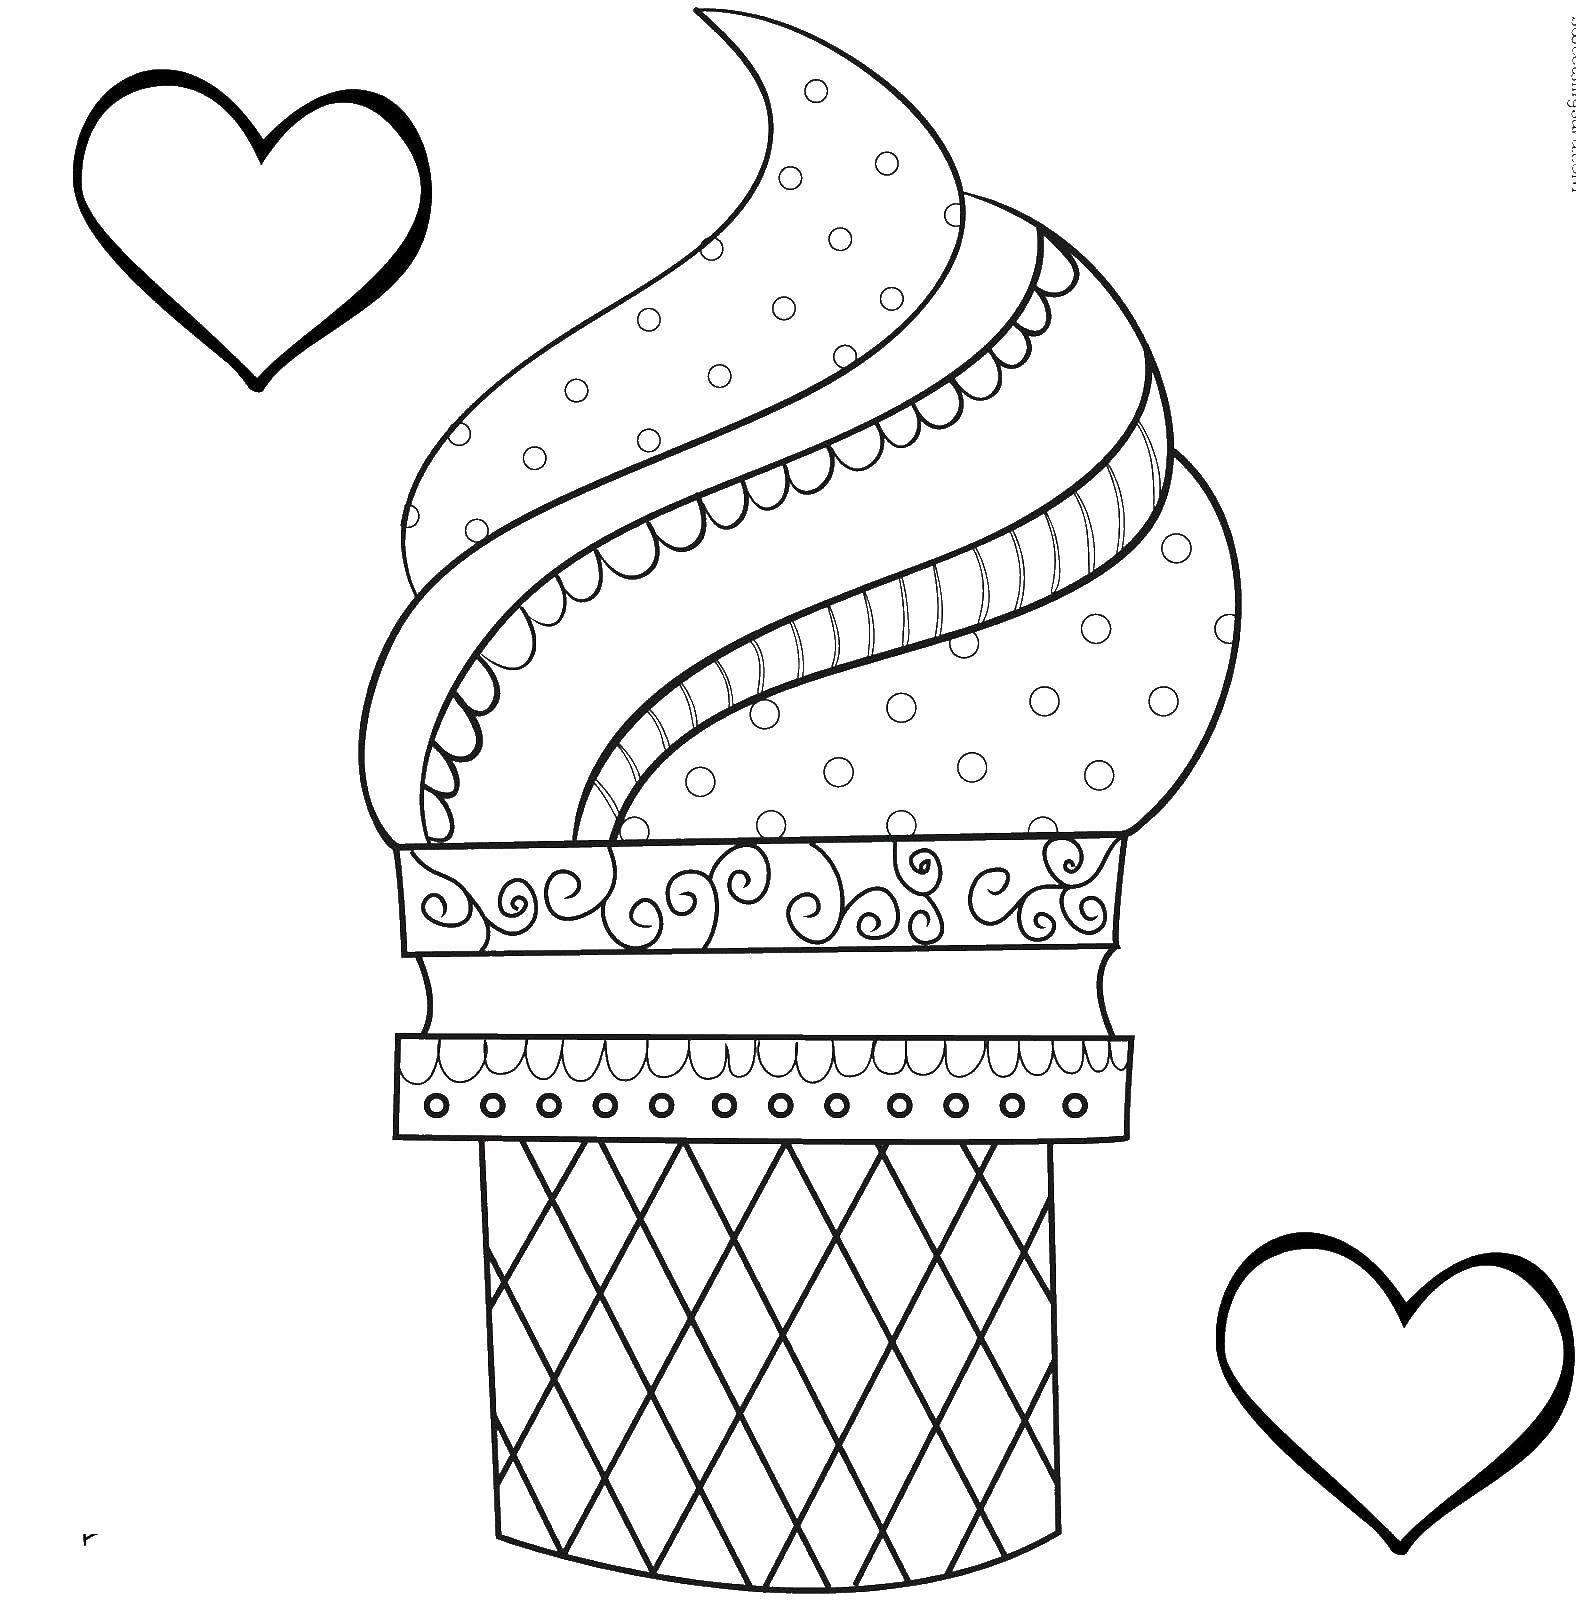 Coloring Patterned ice cream. Category ice cream. Tags:  Ice cream, sweetness, children.